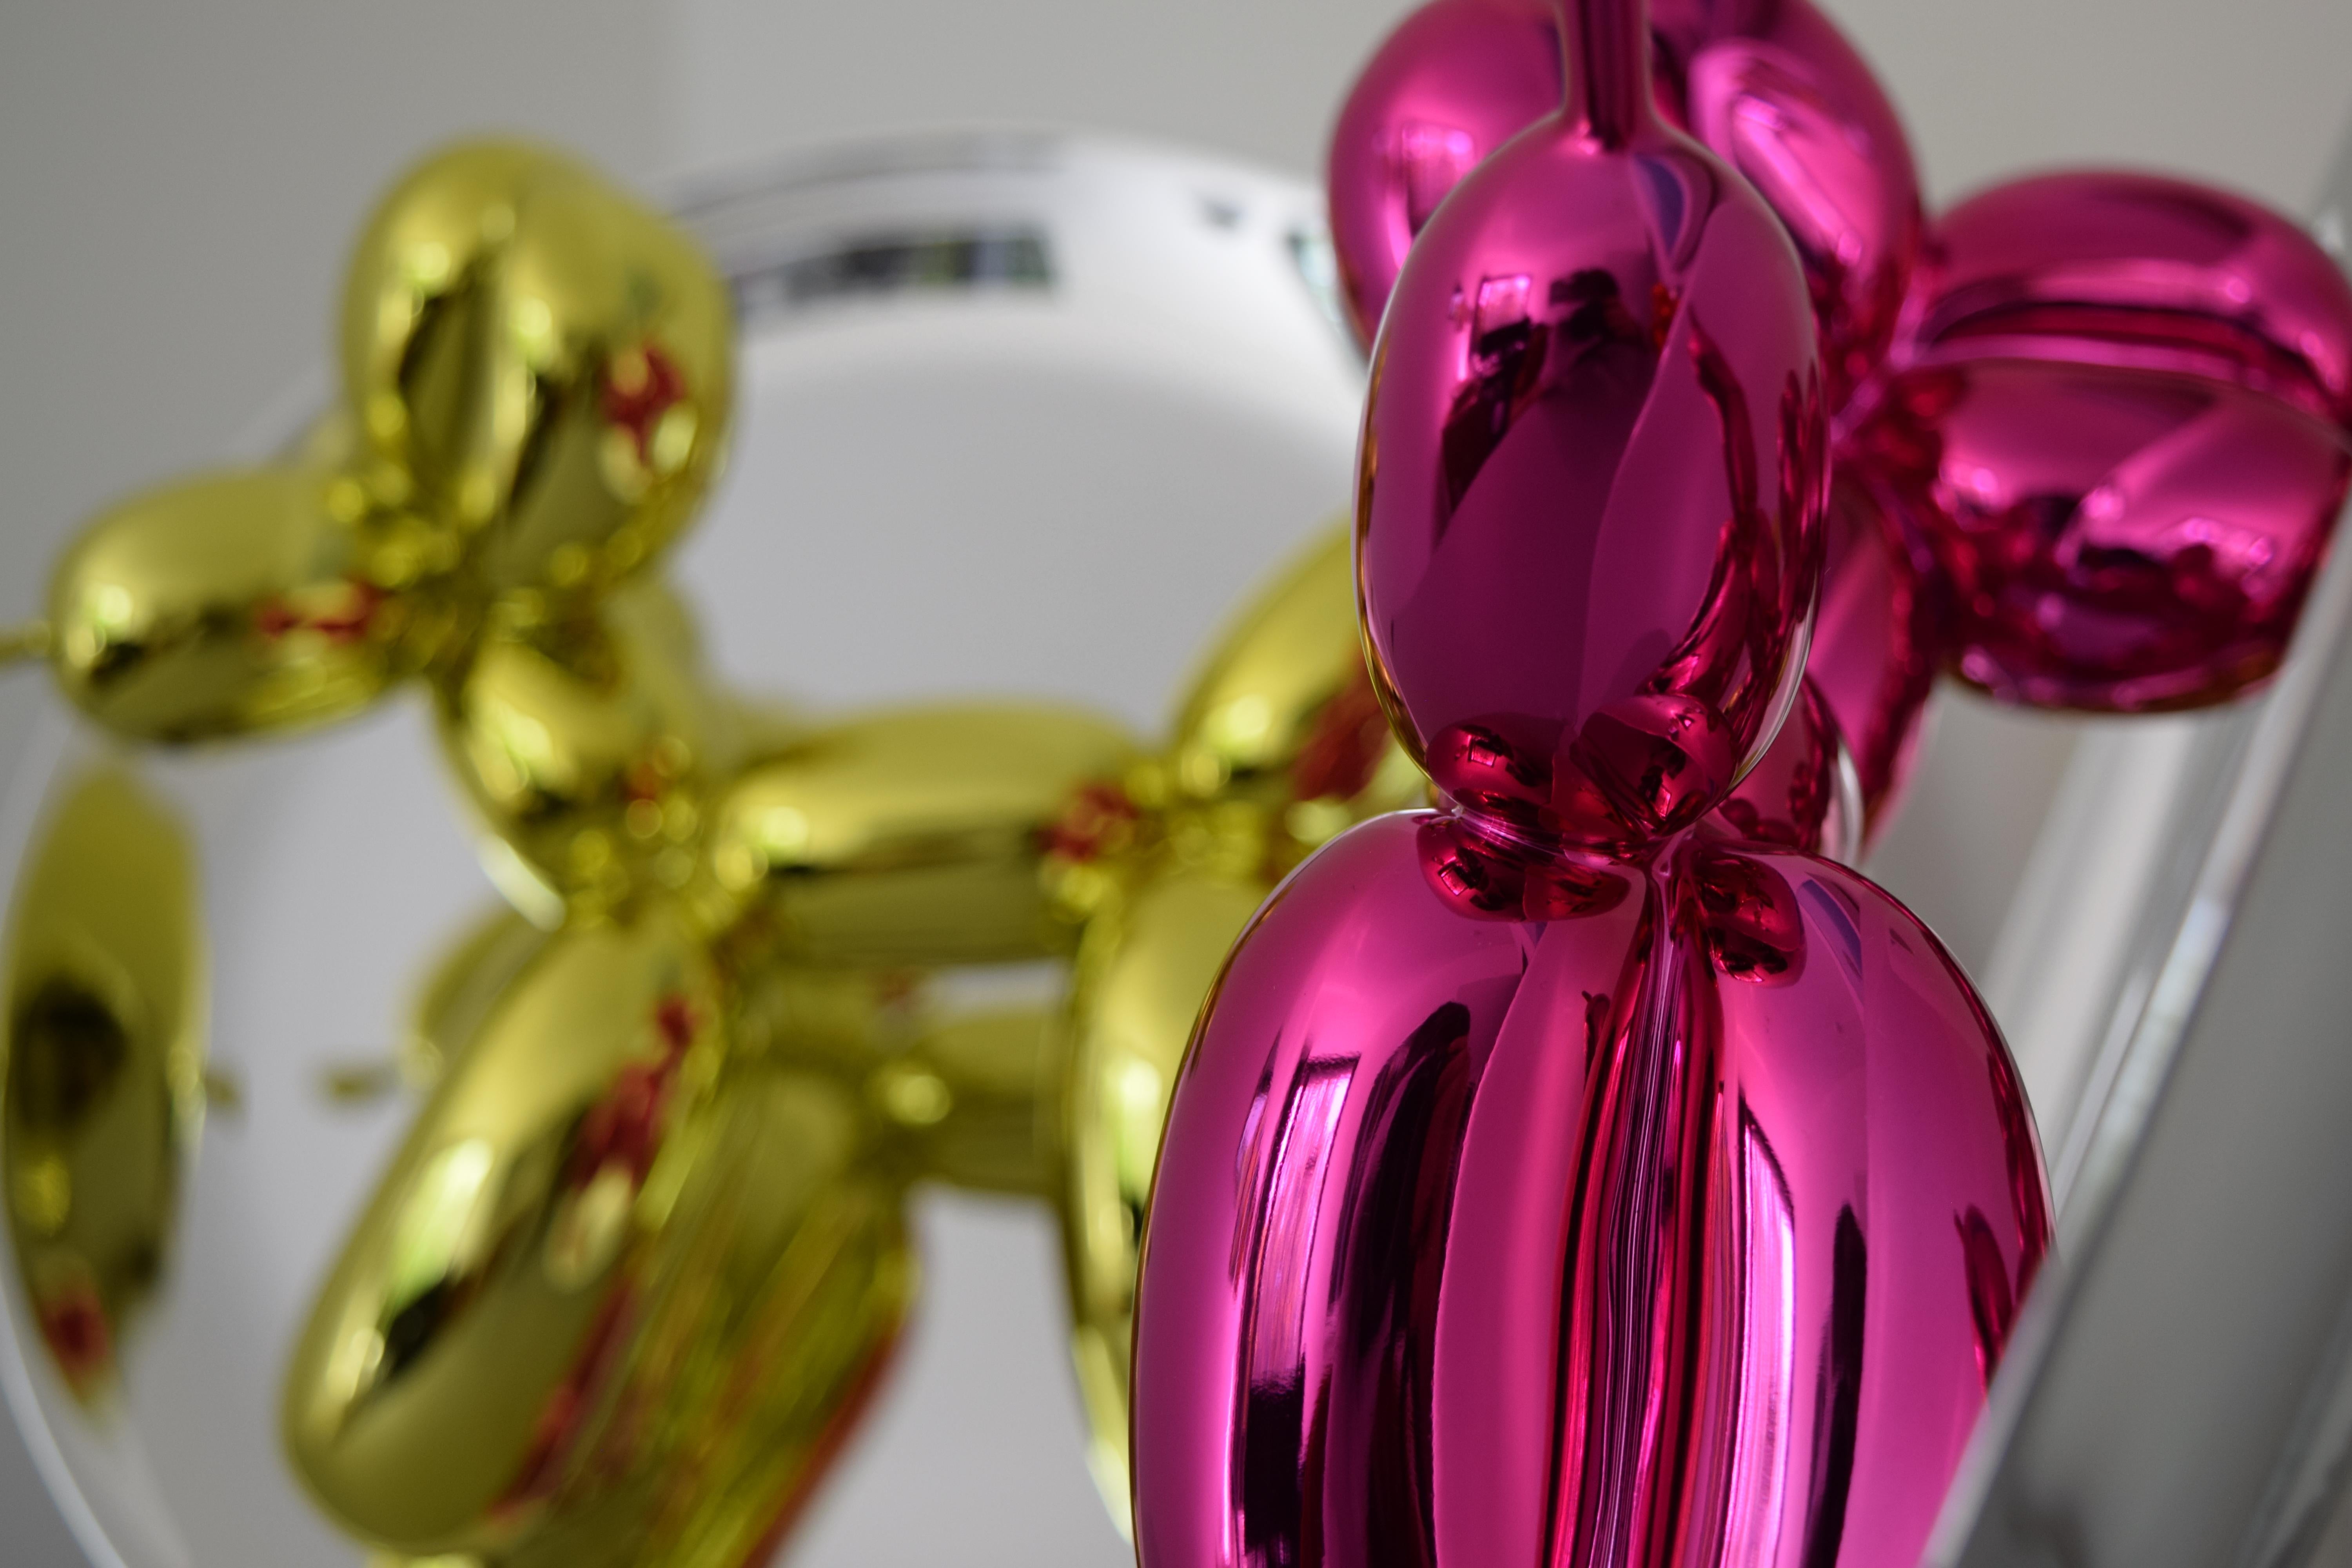 Magenta Balloon Dog Iconic Sculpture by Jeff Koons, Porcelain, Contemporary Art For Sale 14